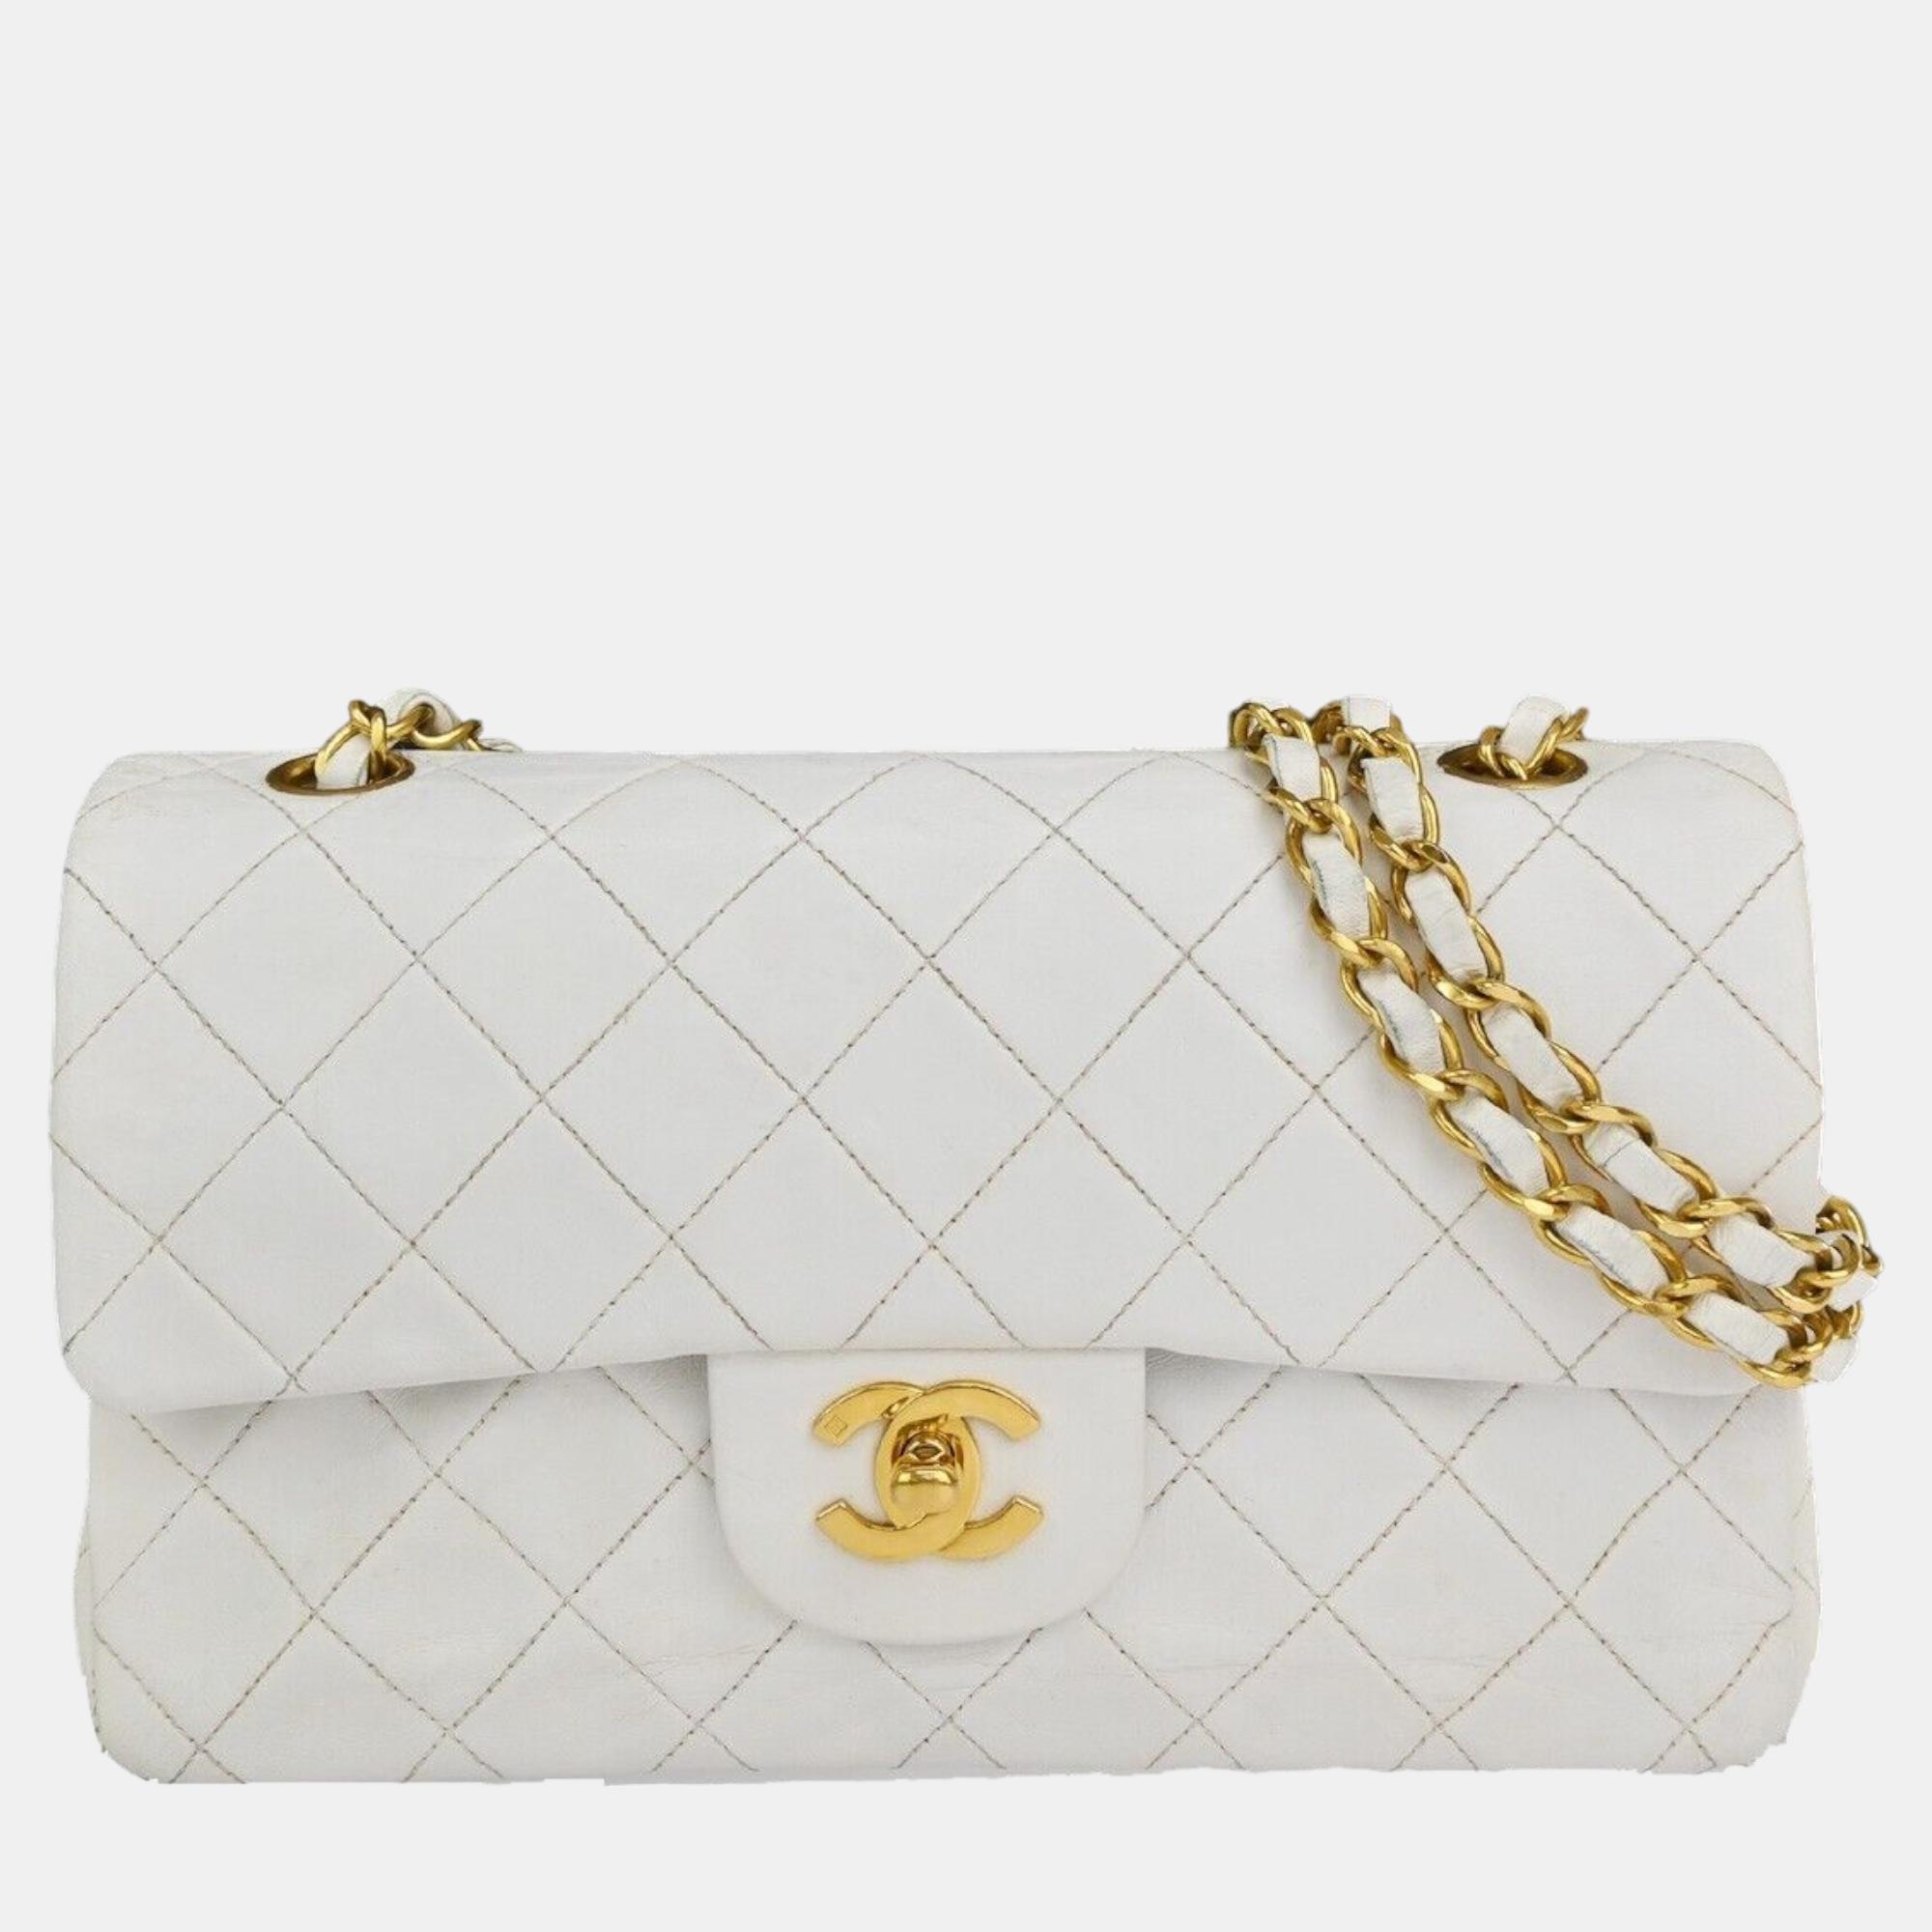 Chanel white lambskin leather small classic double flap shoulder bags